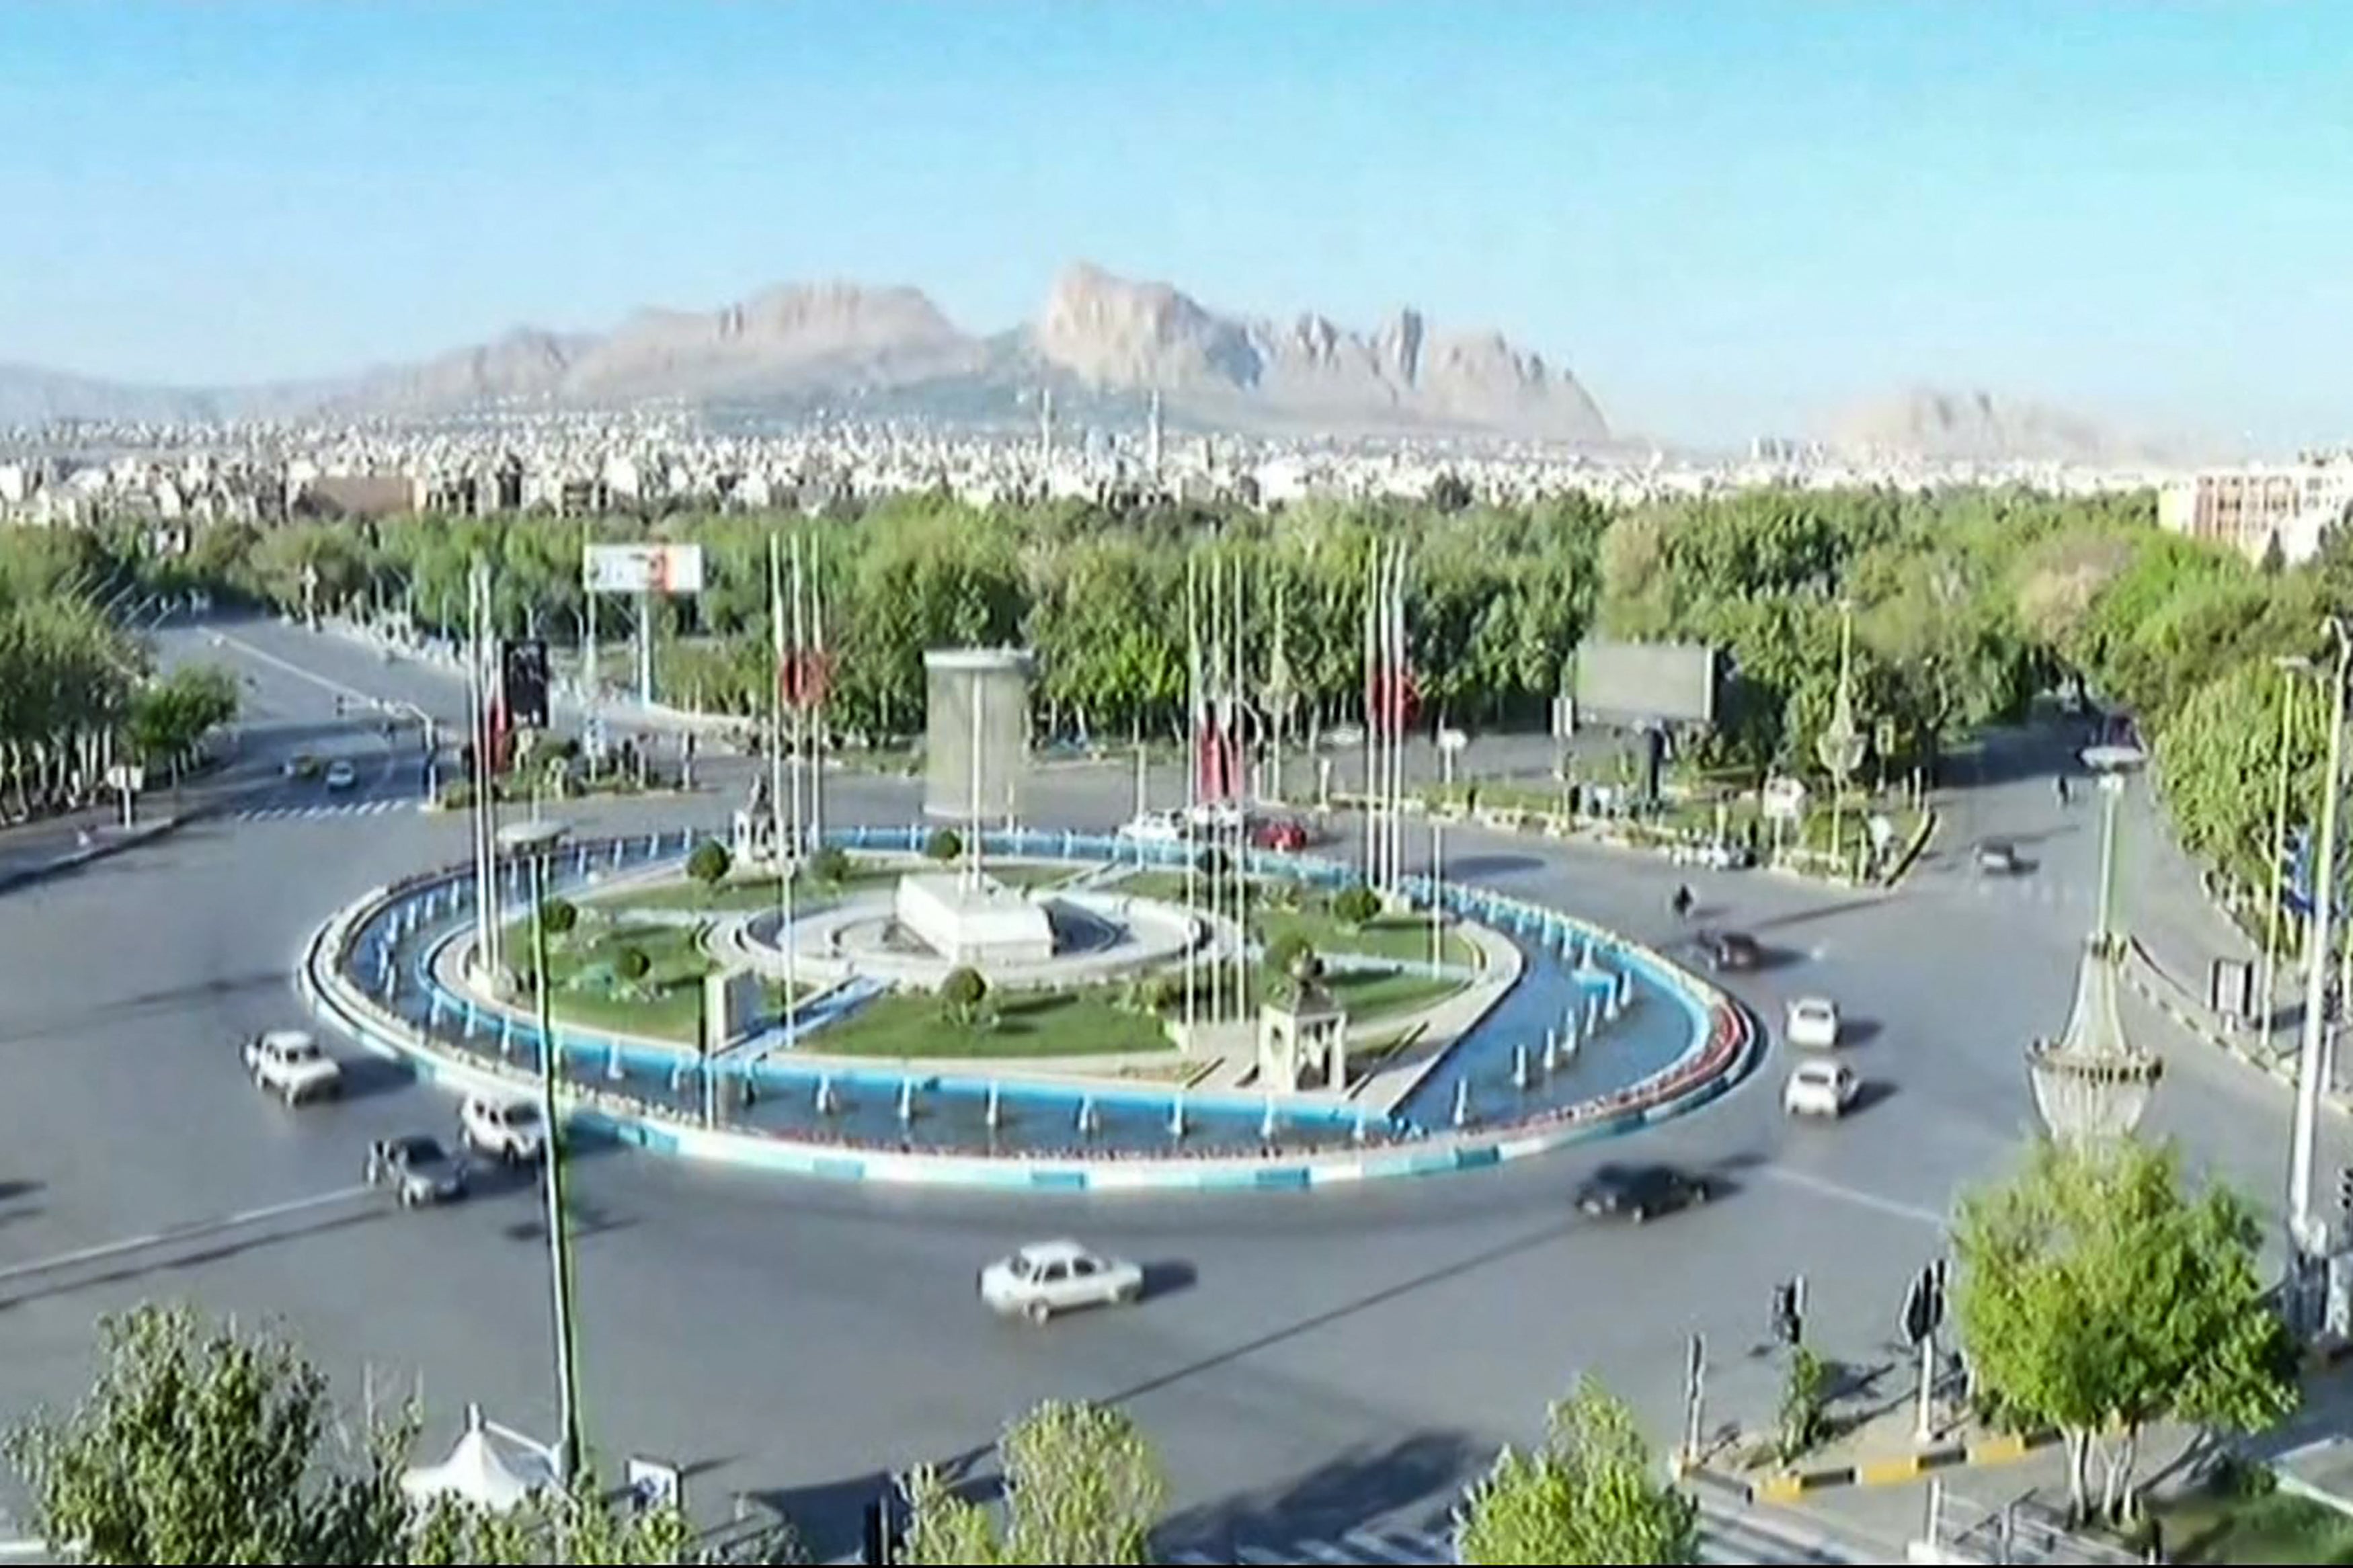 Iranian state TV released an image of the city in the wake of explosions overnight as the country appeared to downplay the attack